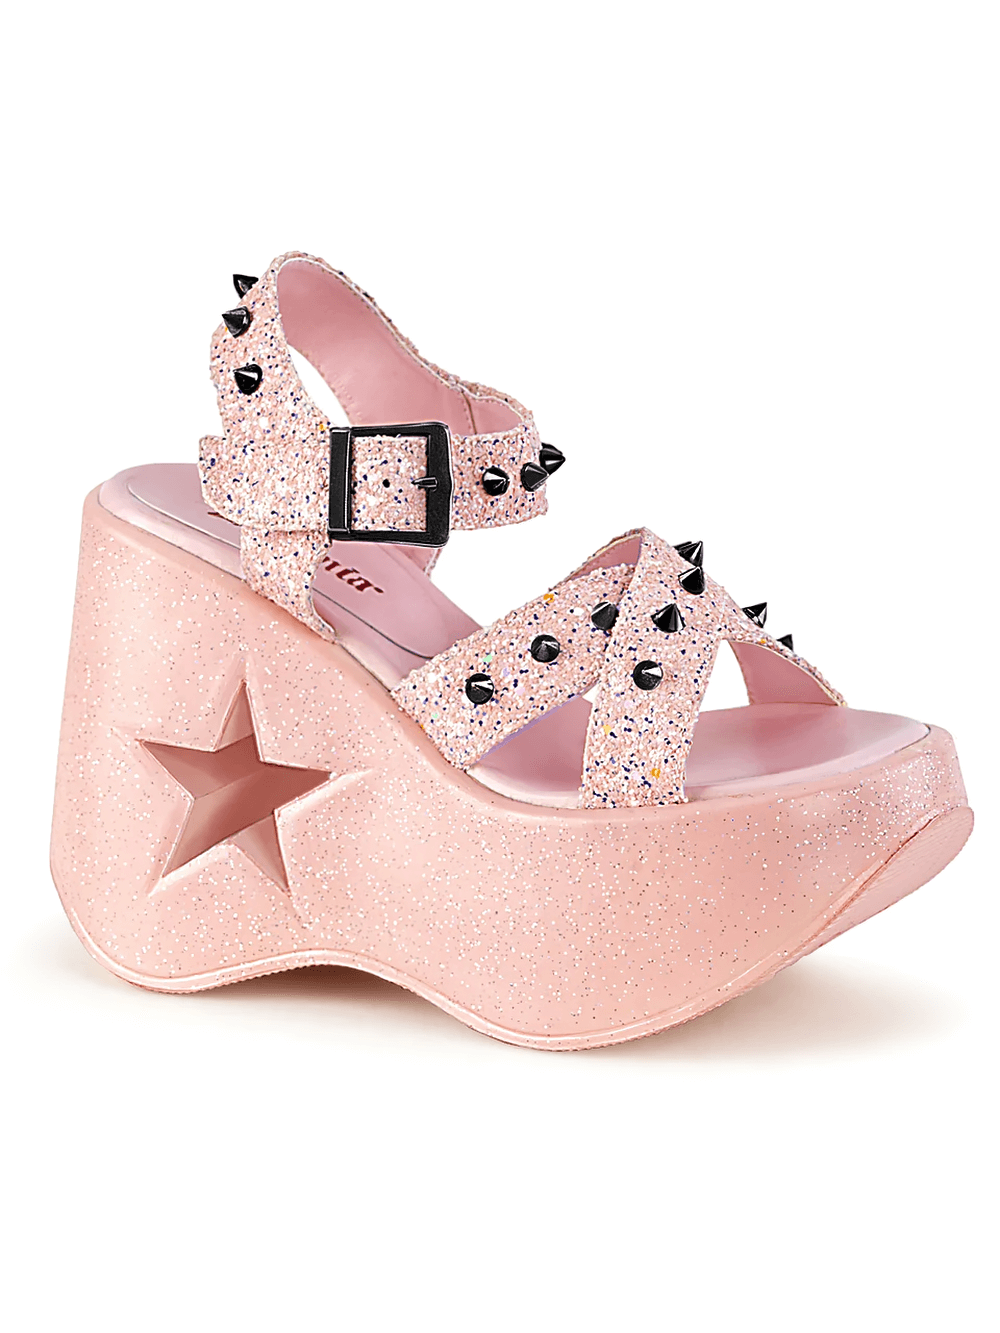 DEMONIA Pink Glitter Star Wedge Sandals with Spike Accents